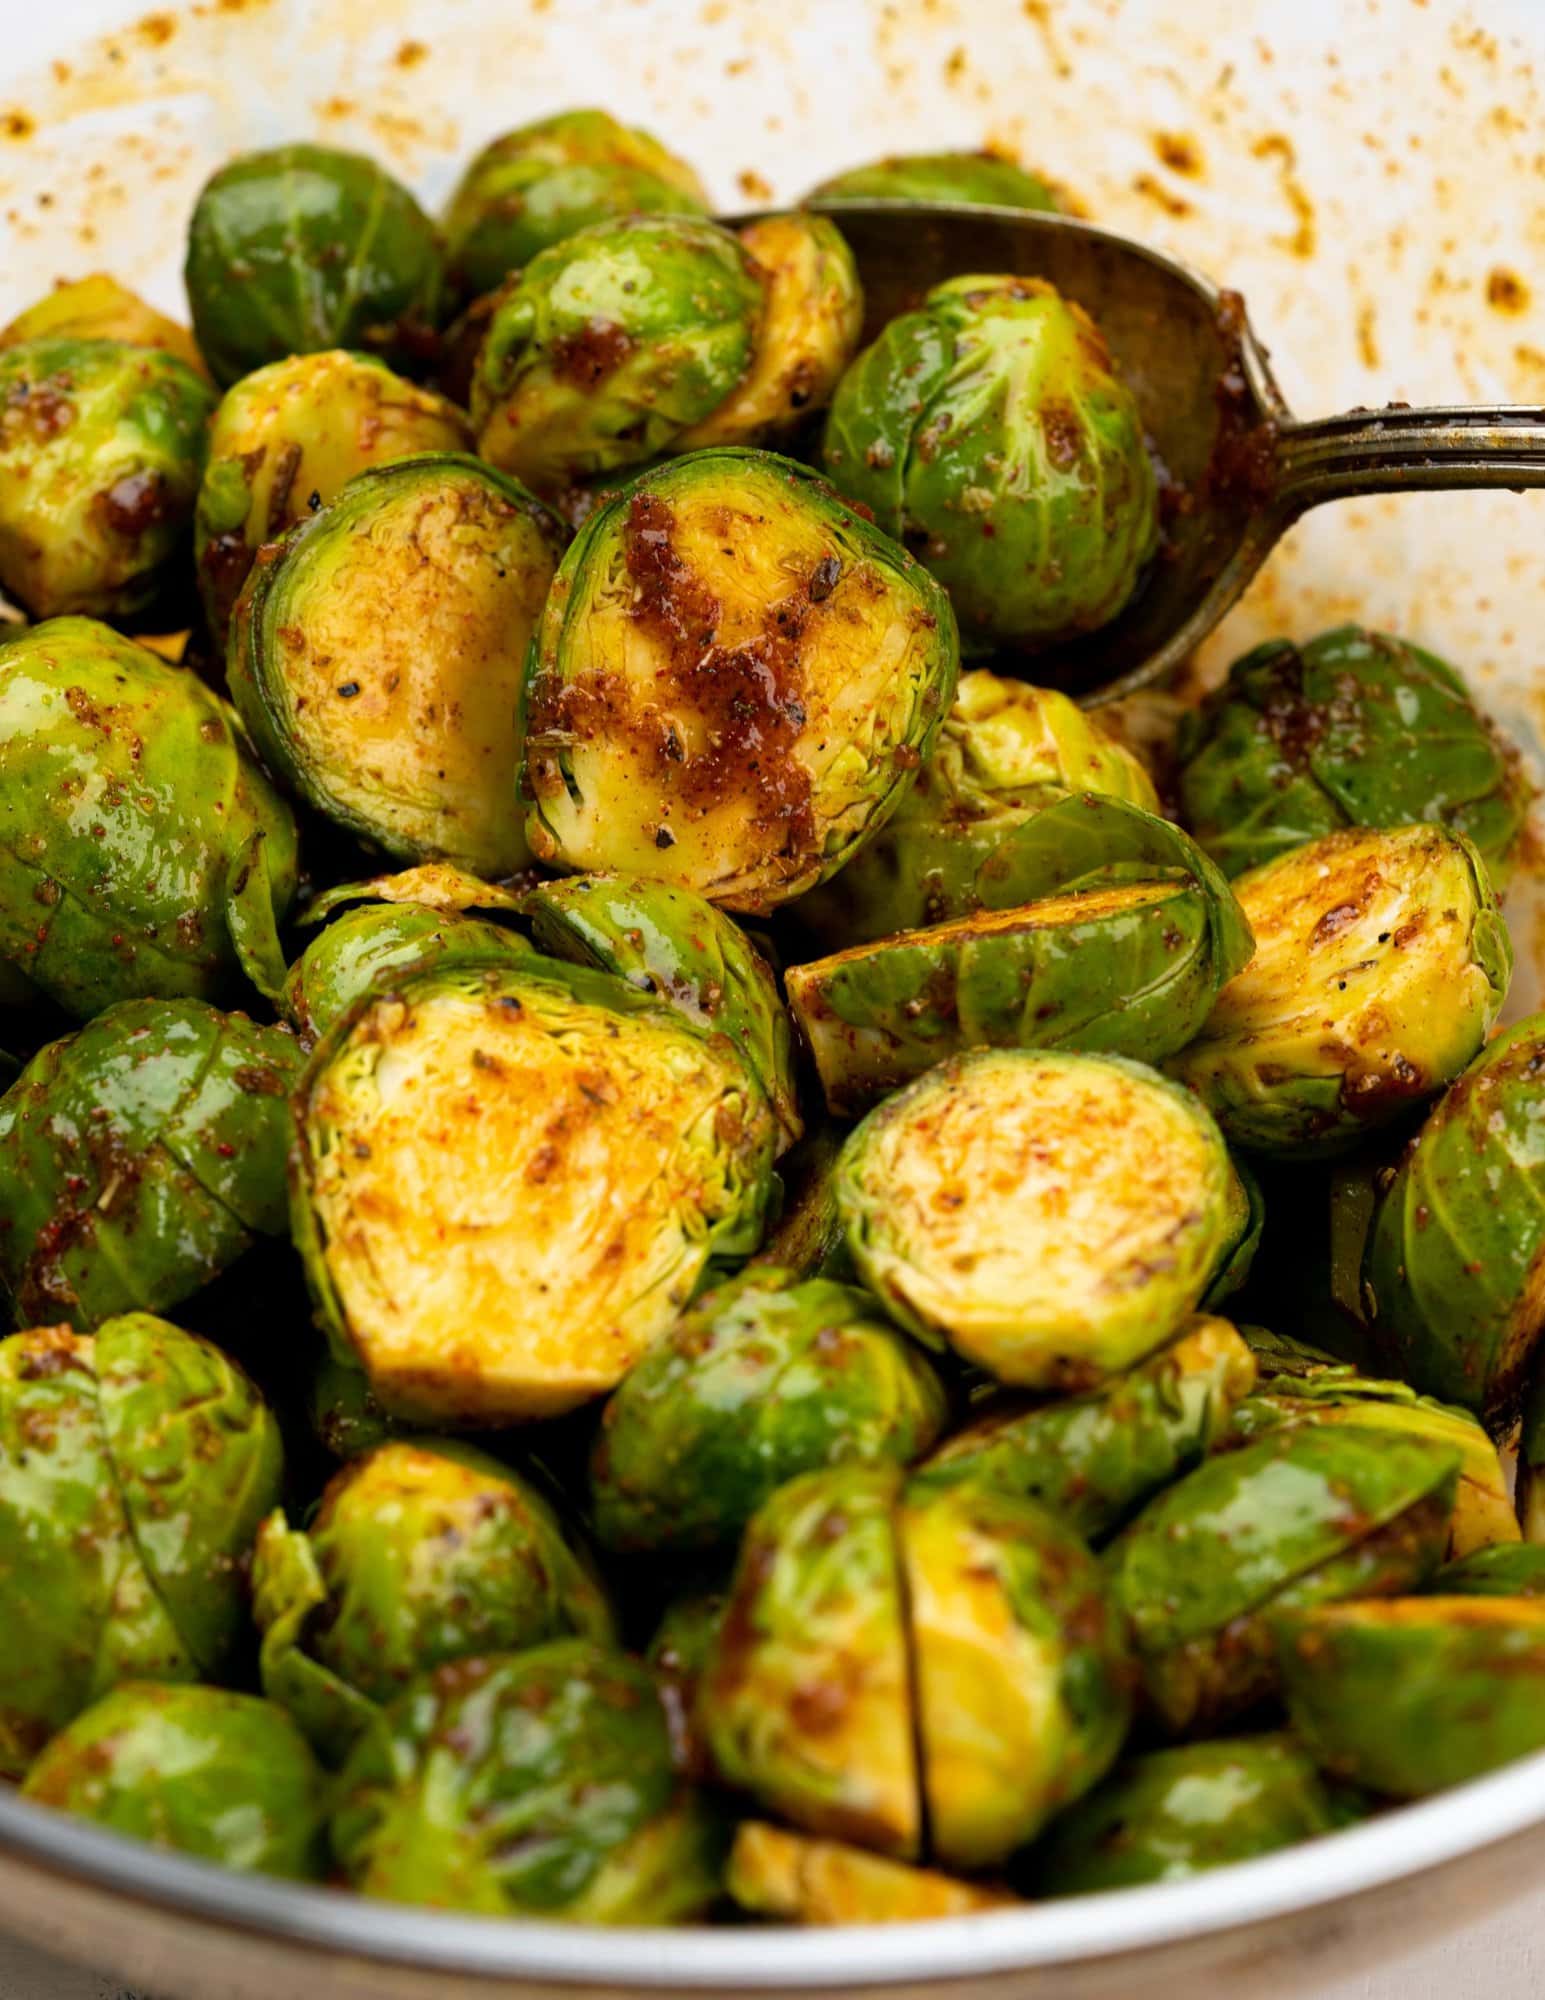 Image showing chopped brussel sprouts tossed in a bowl and coated with seasoning mix.